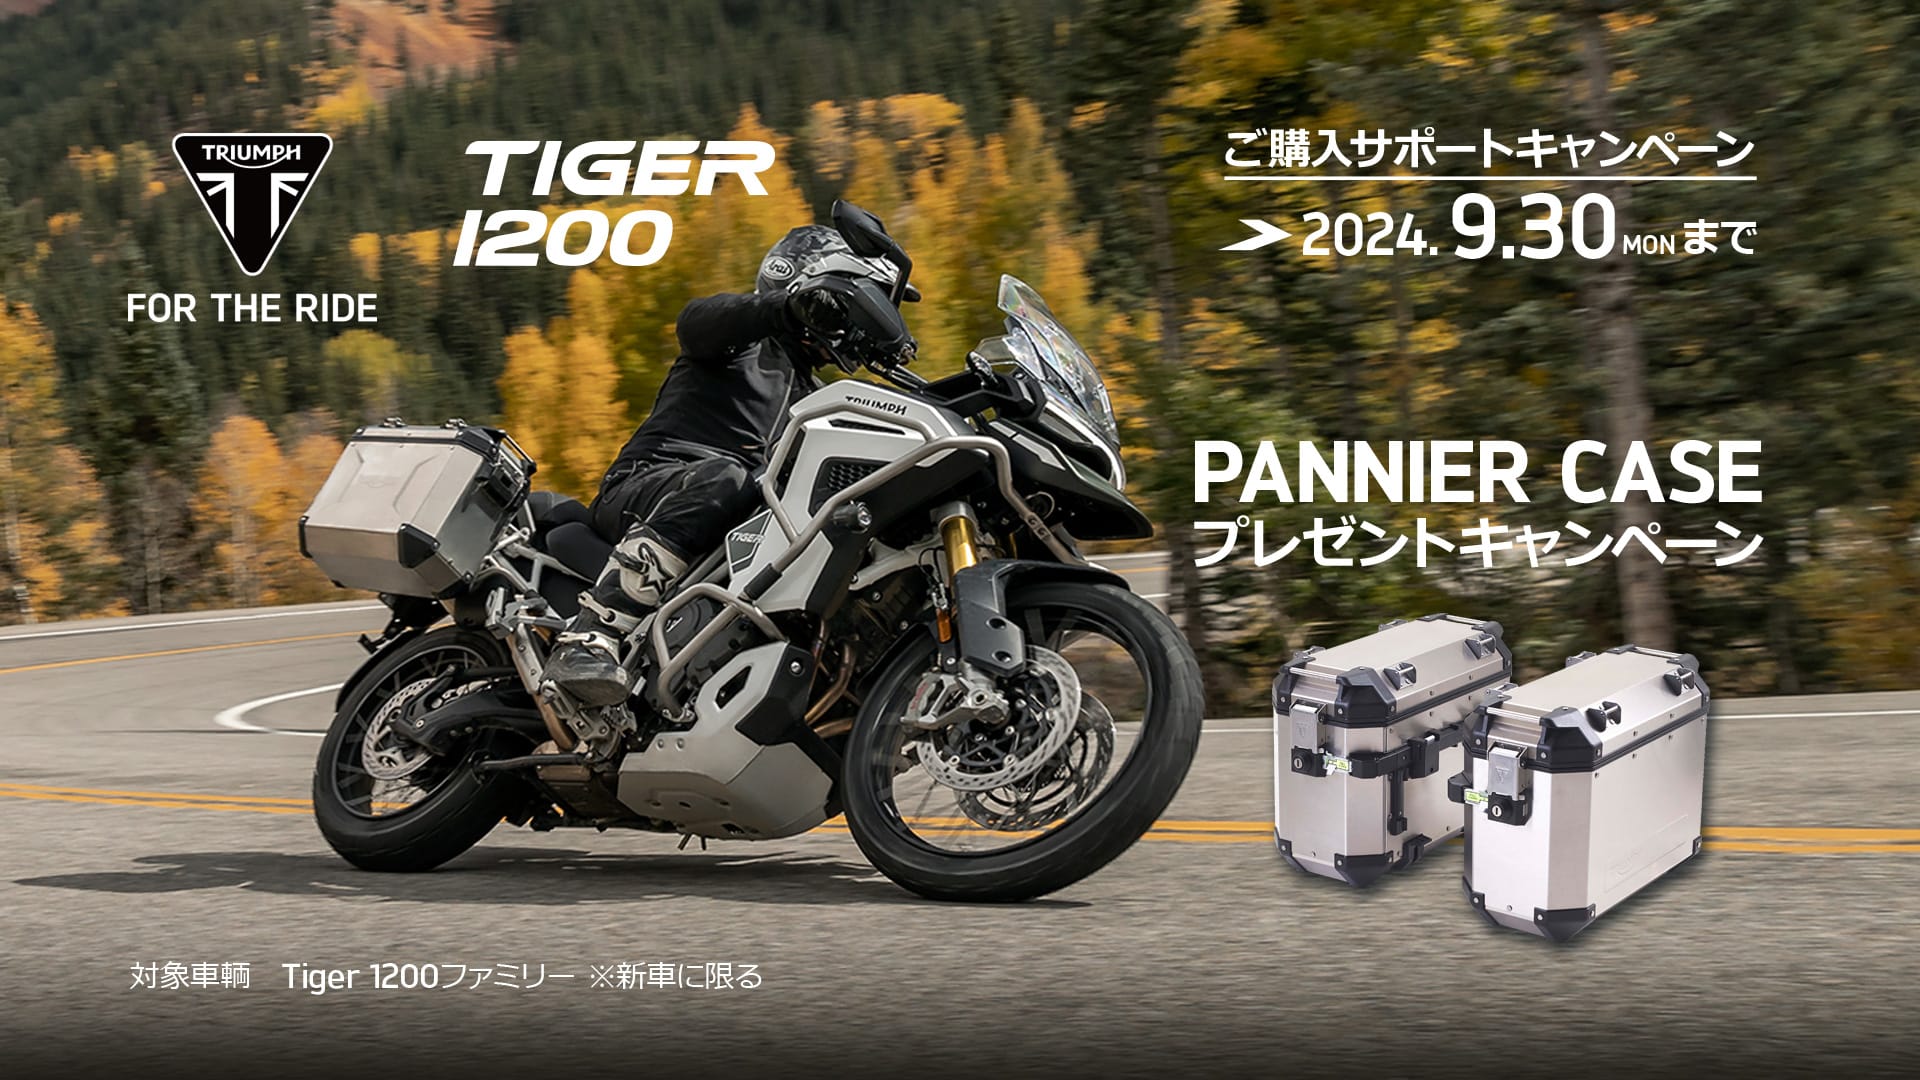 TIGER 1200 PANNIER CASEプレゼントキャンペーン | For the Ride